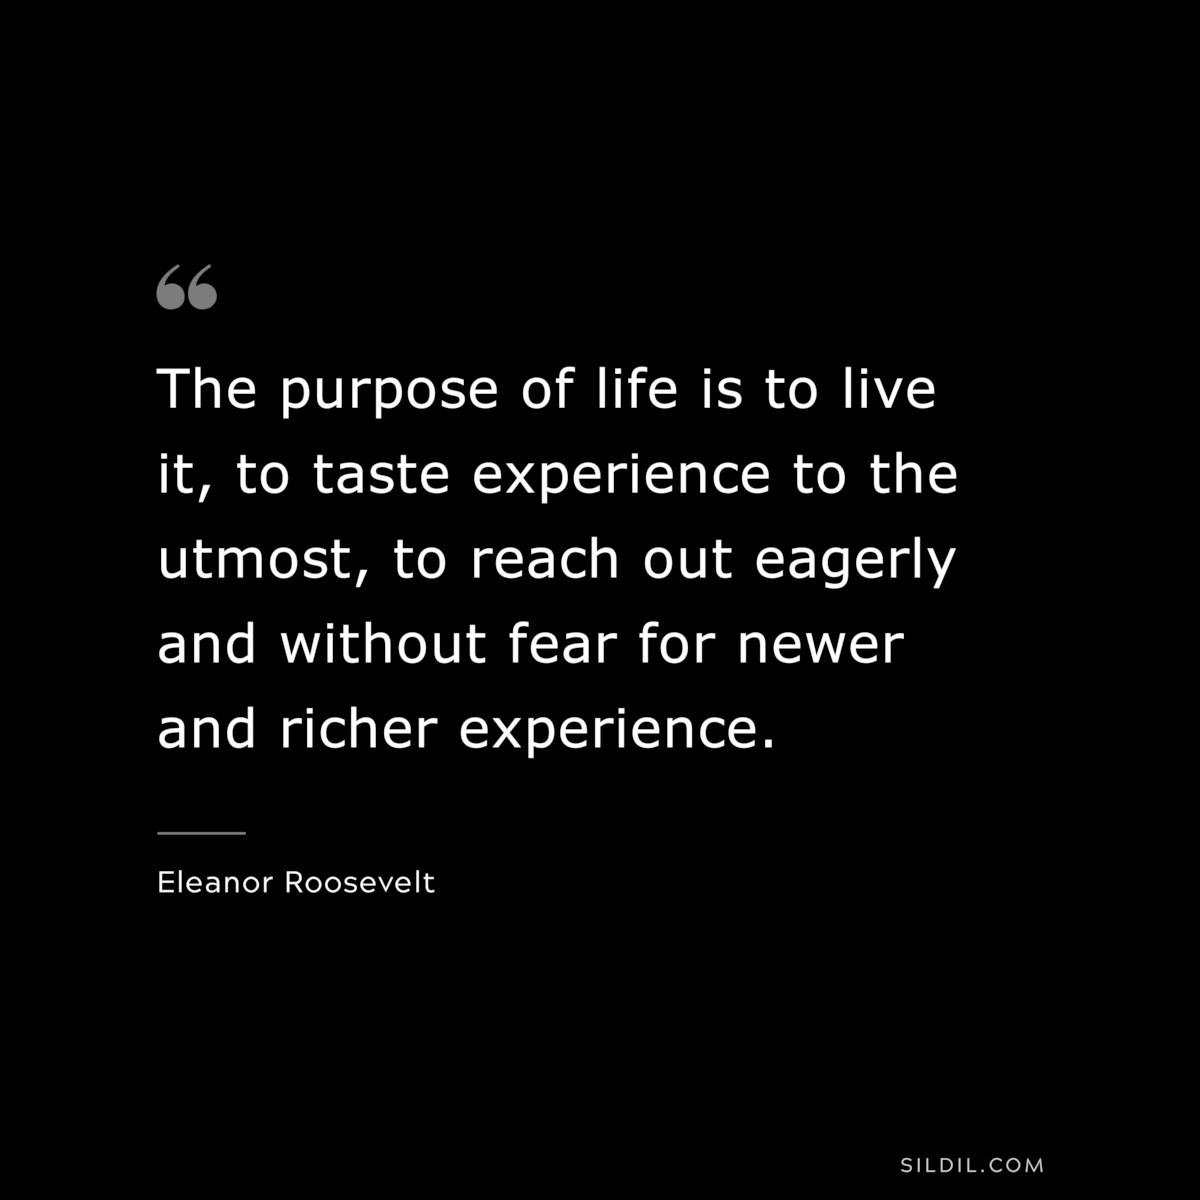 The purpose of life is to live it, to taste experience to the utmost, to reach out eagerly and without fear for newer and richer experience. ― Eleanor Roosevelt